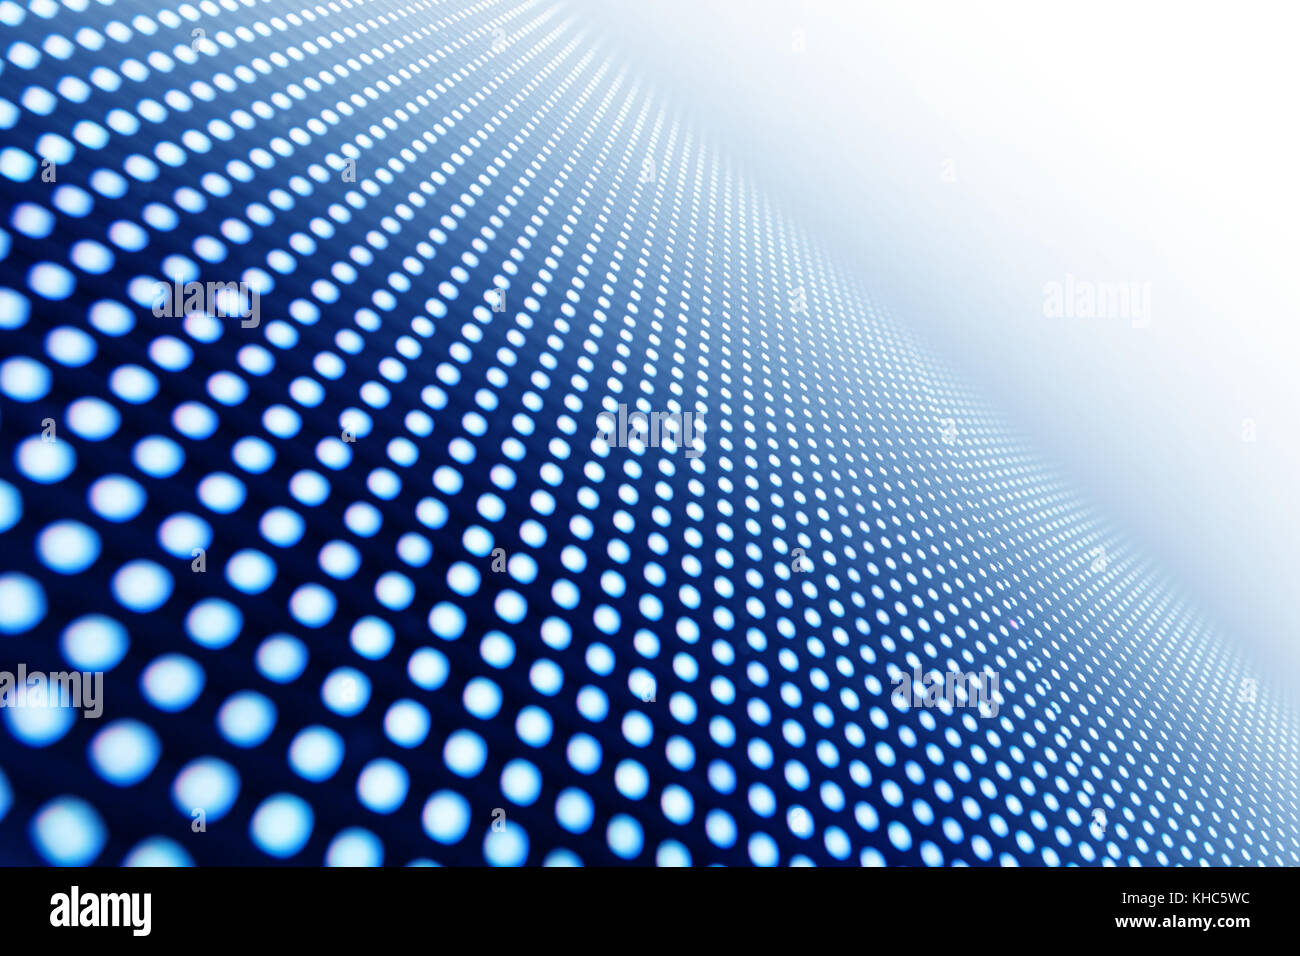 Defocused LED panel in perspective, blur abstract background Stock Photo